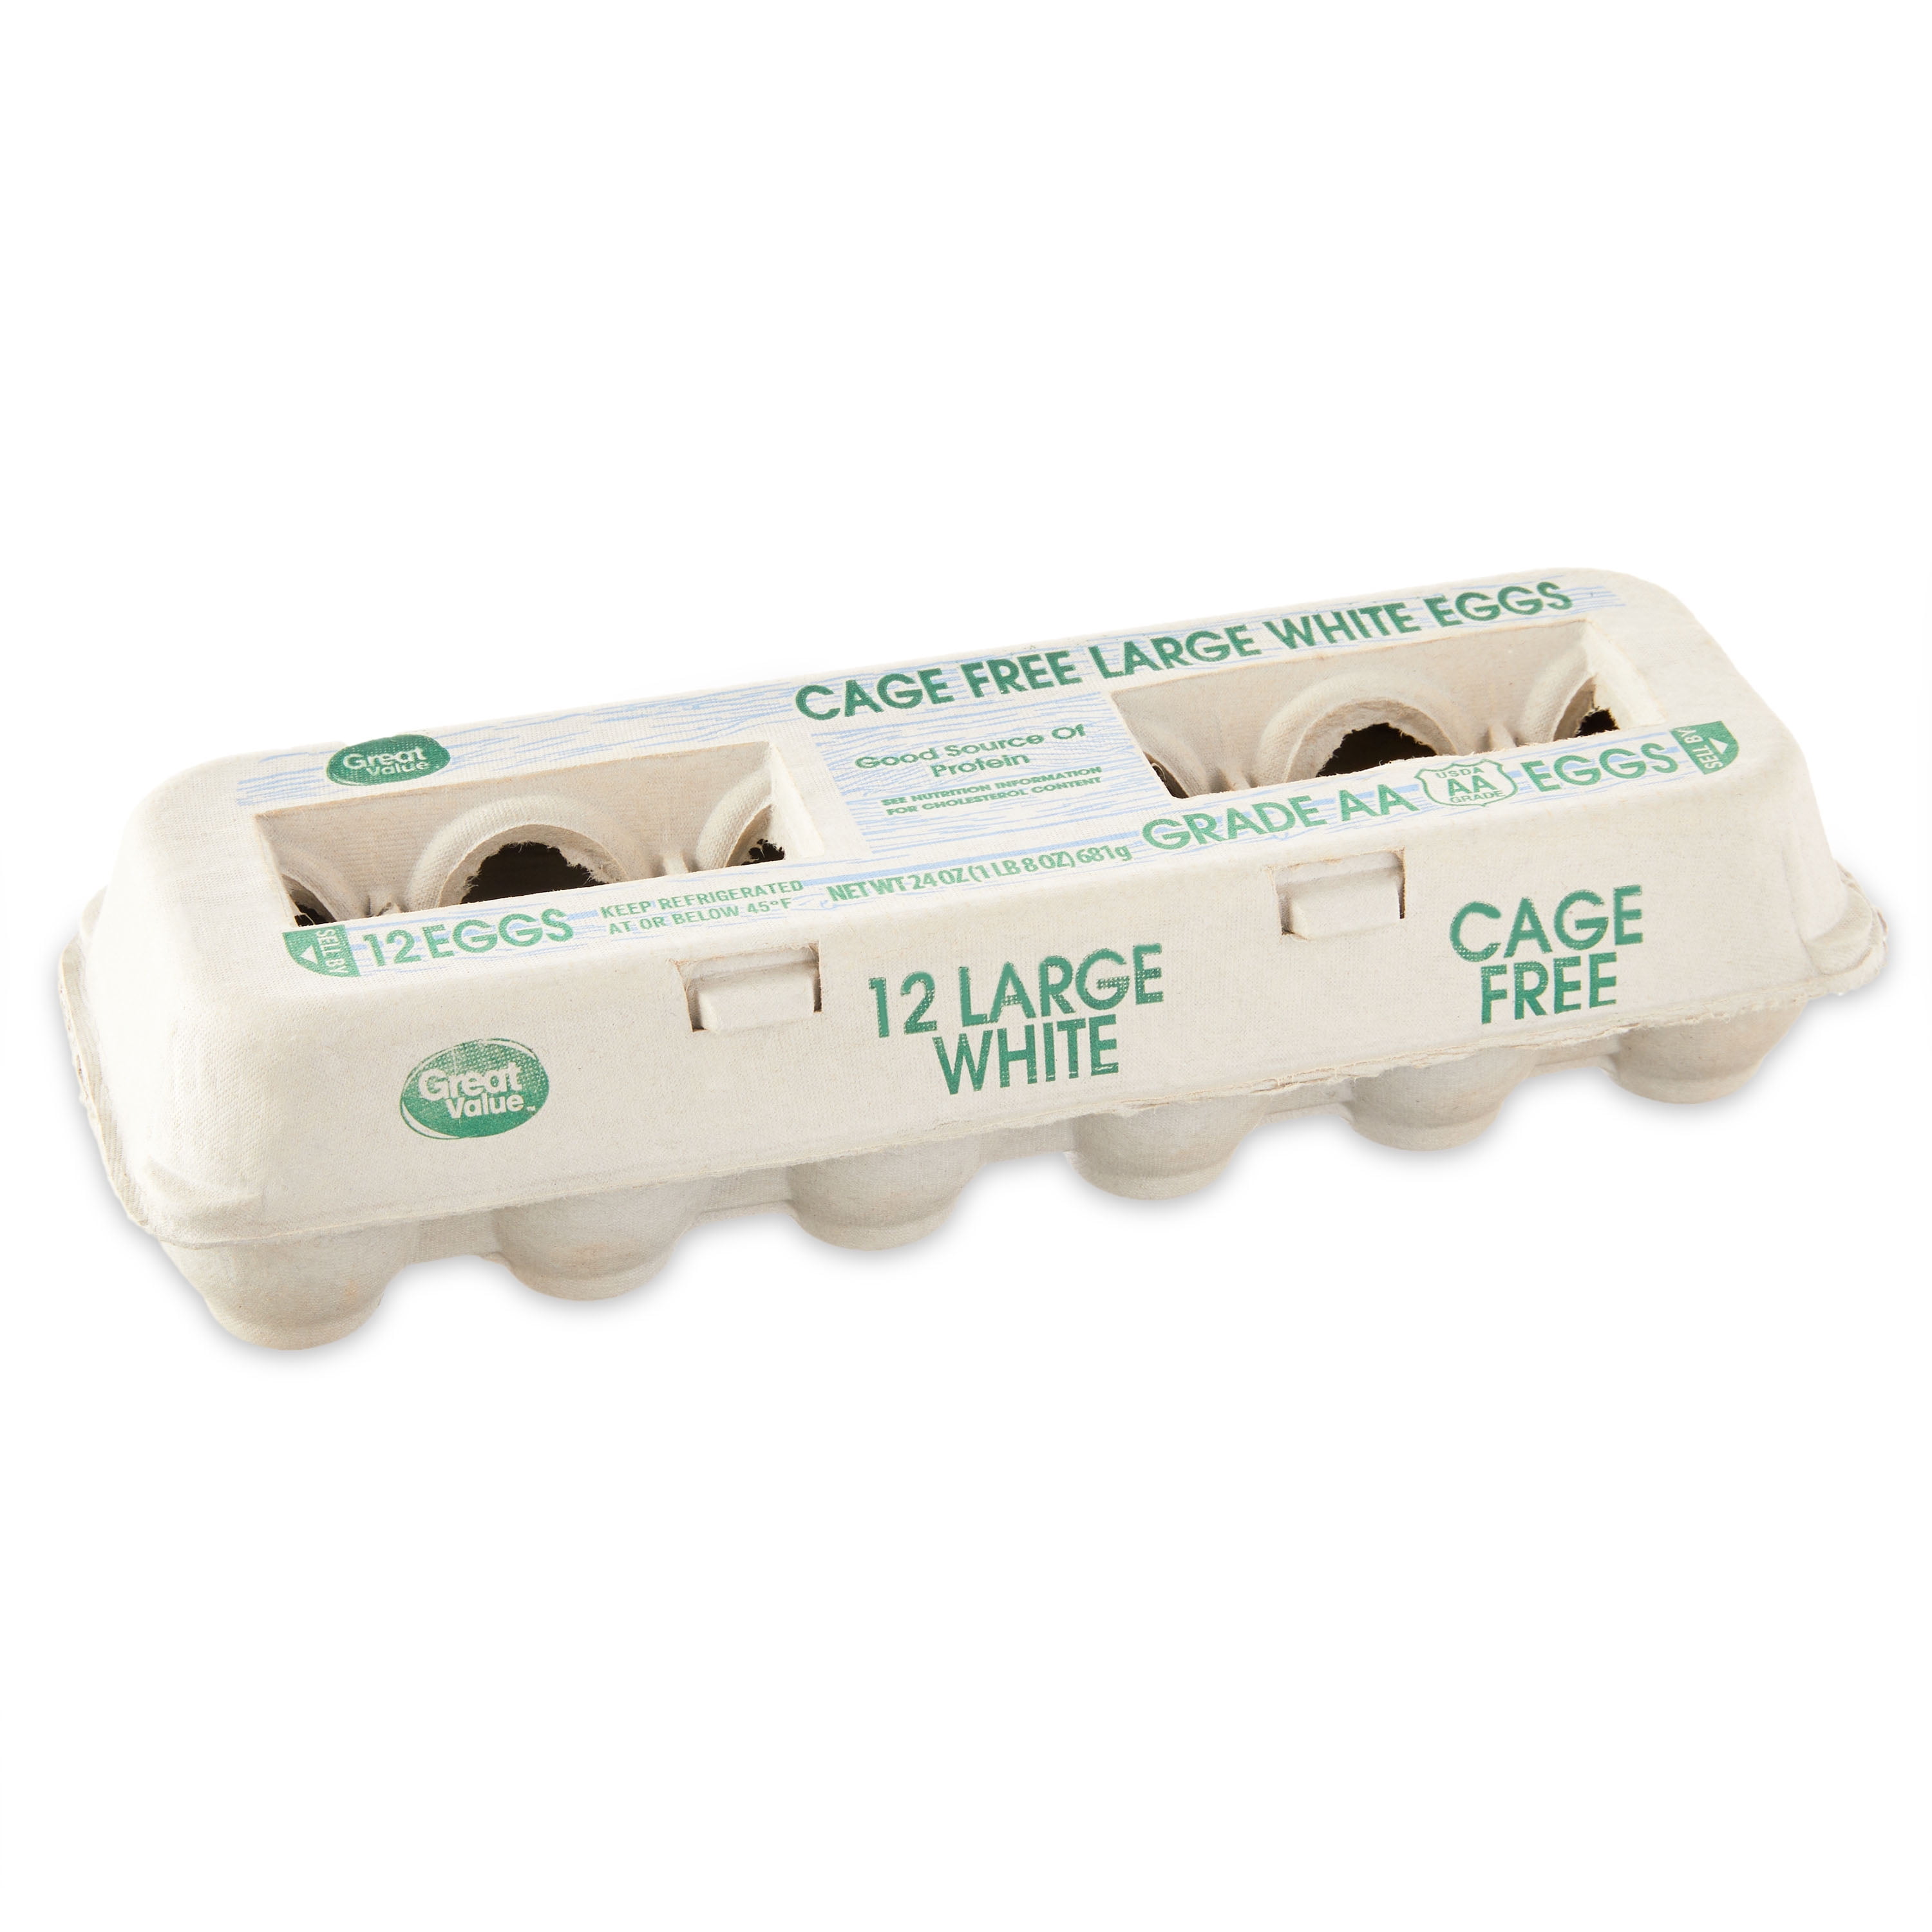 Great Value Cage Free Large AA White Eggs, 12 Count